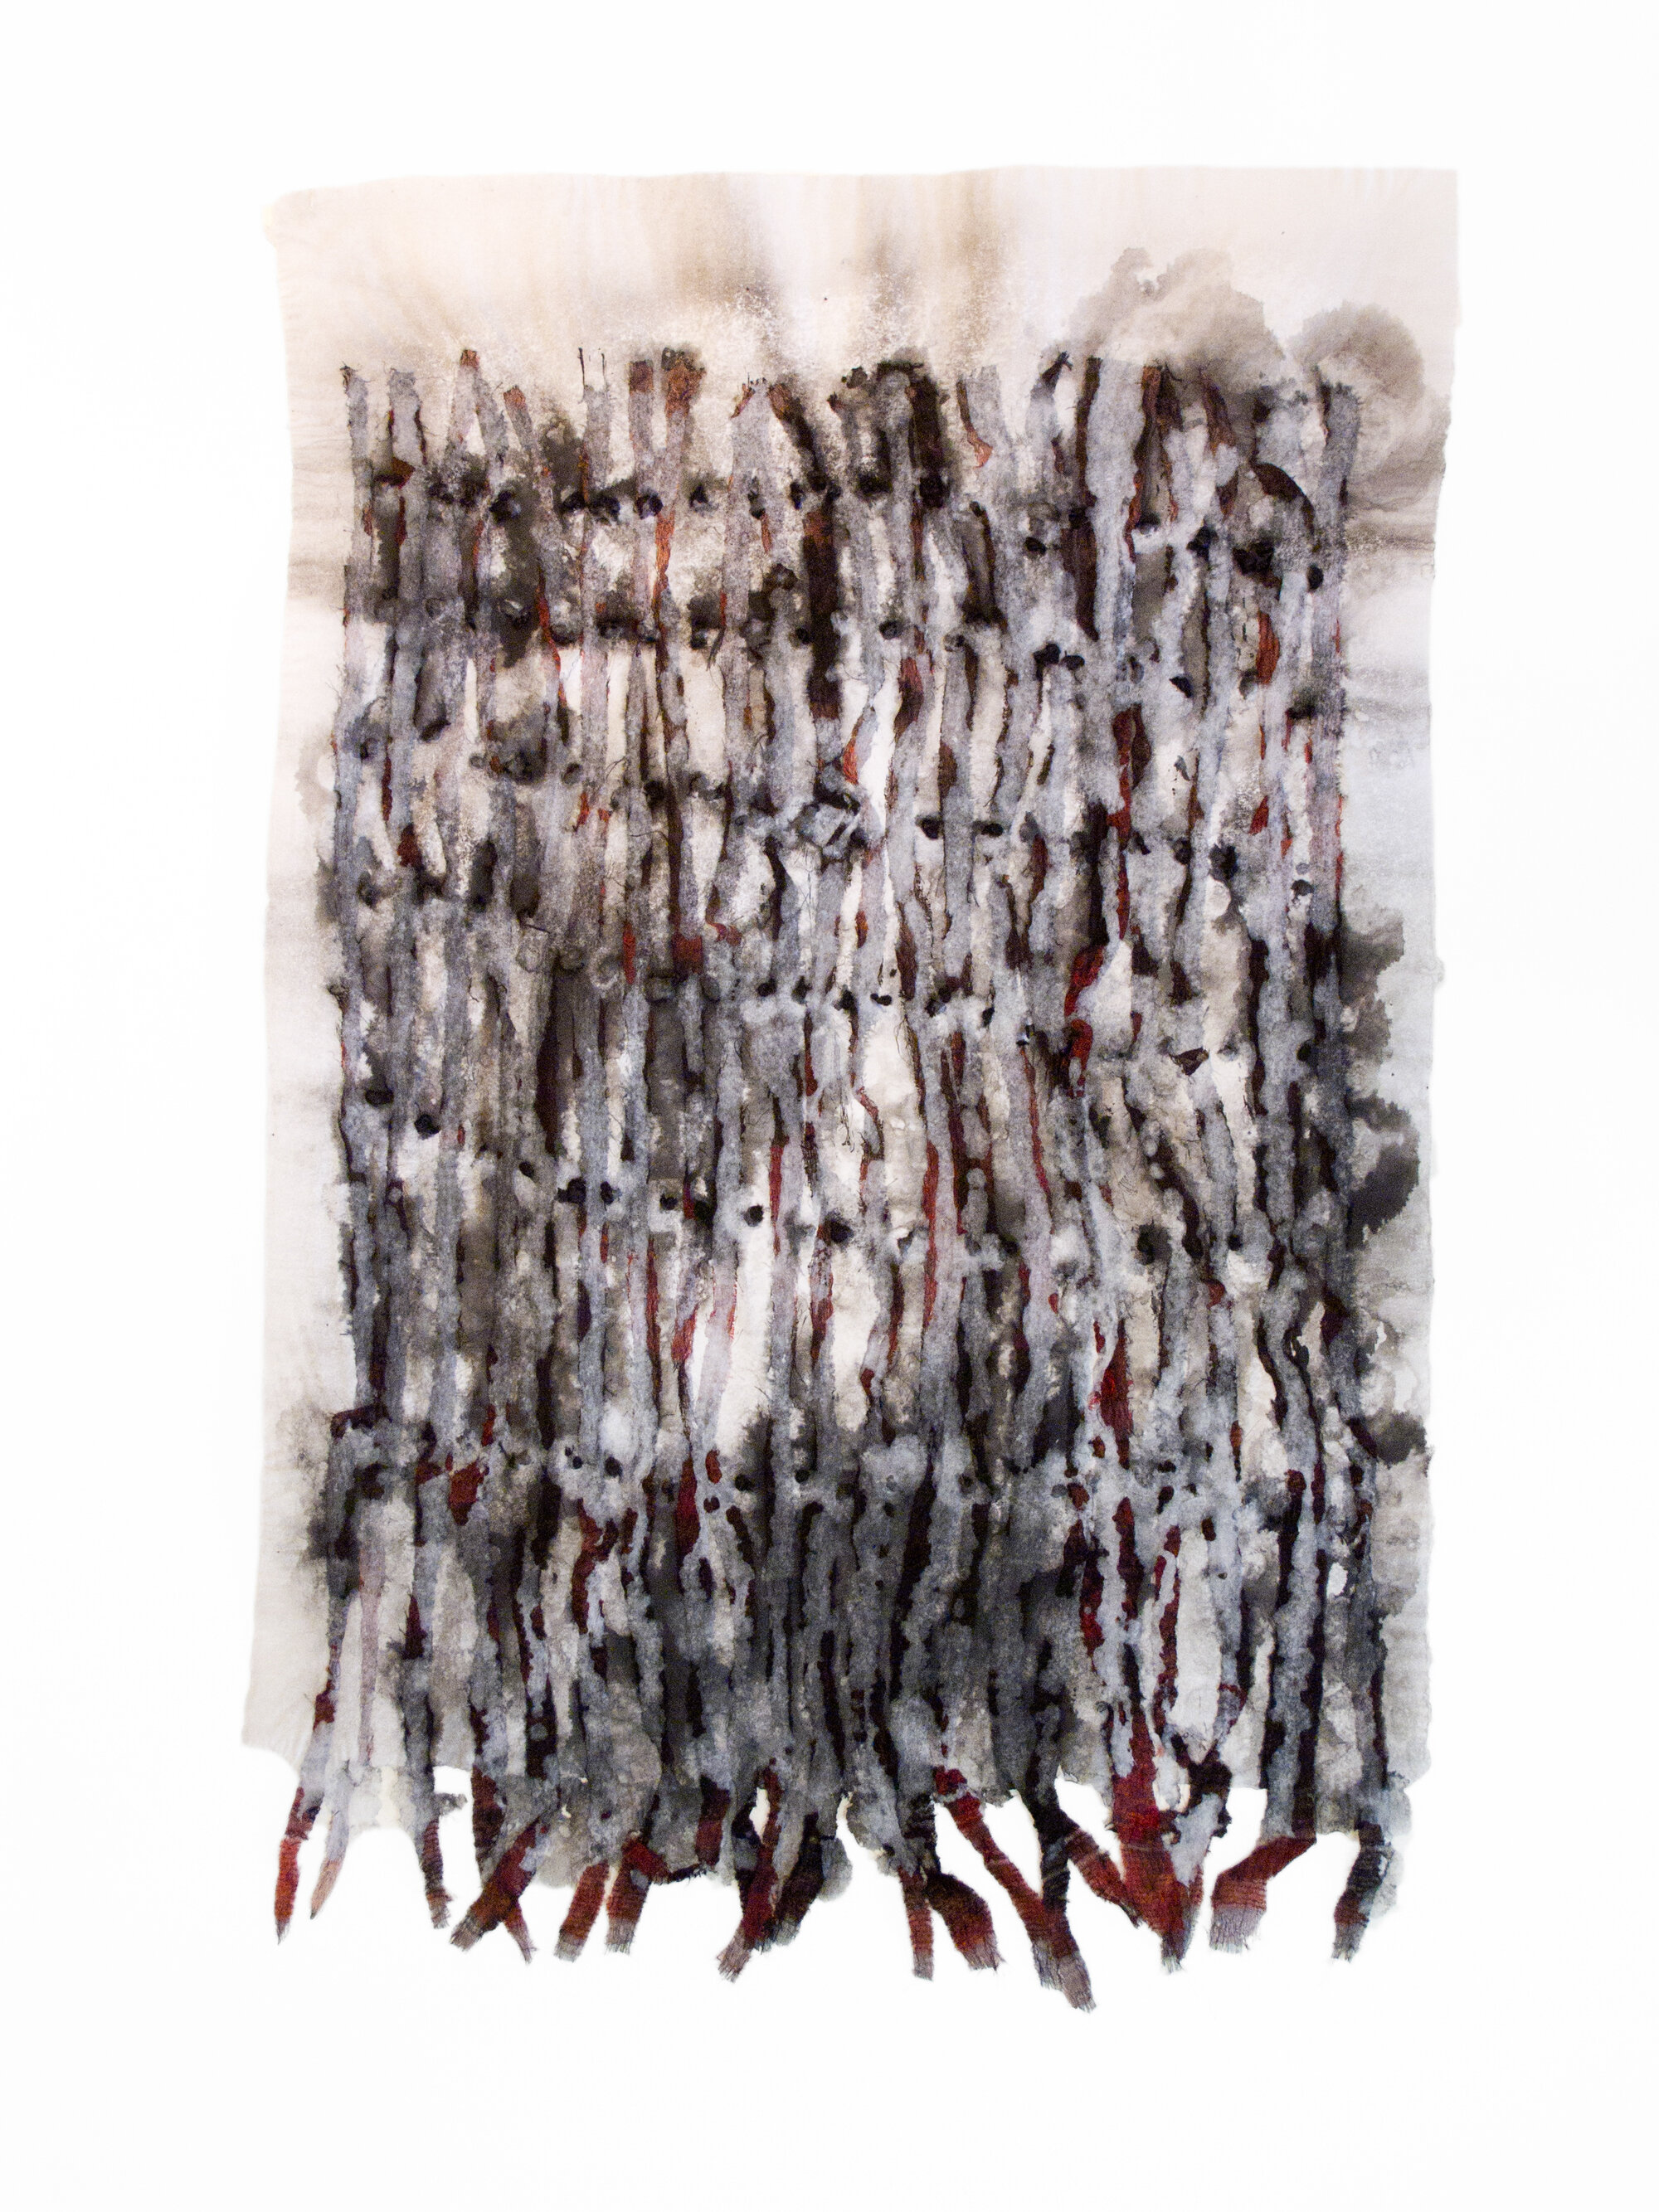   Untitled , 2013 Fabric, thread, pigment, and linen handmade paper 32 x 21 in. 